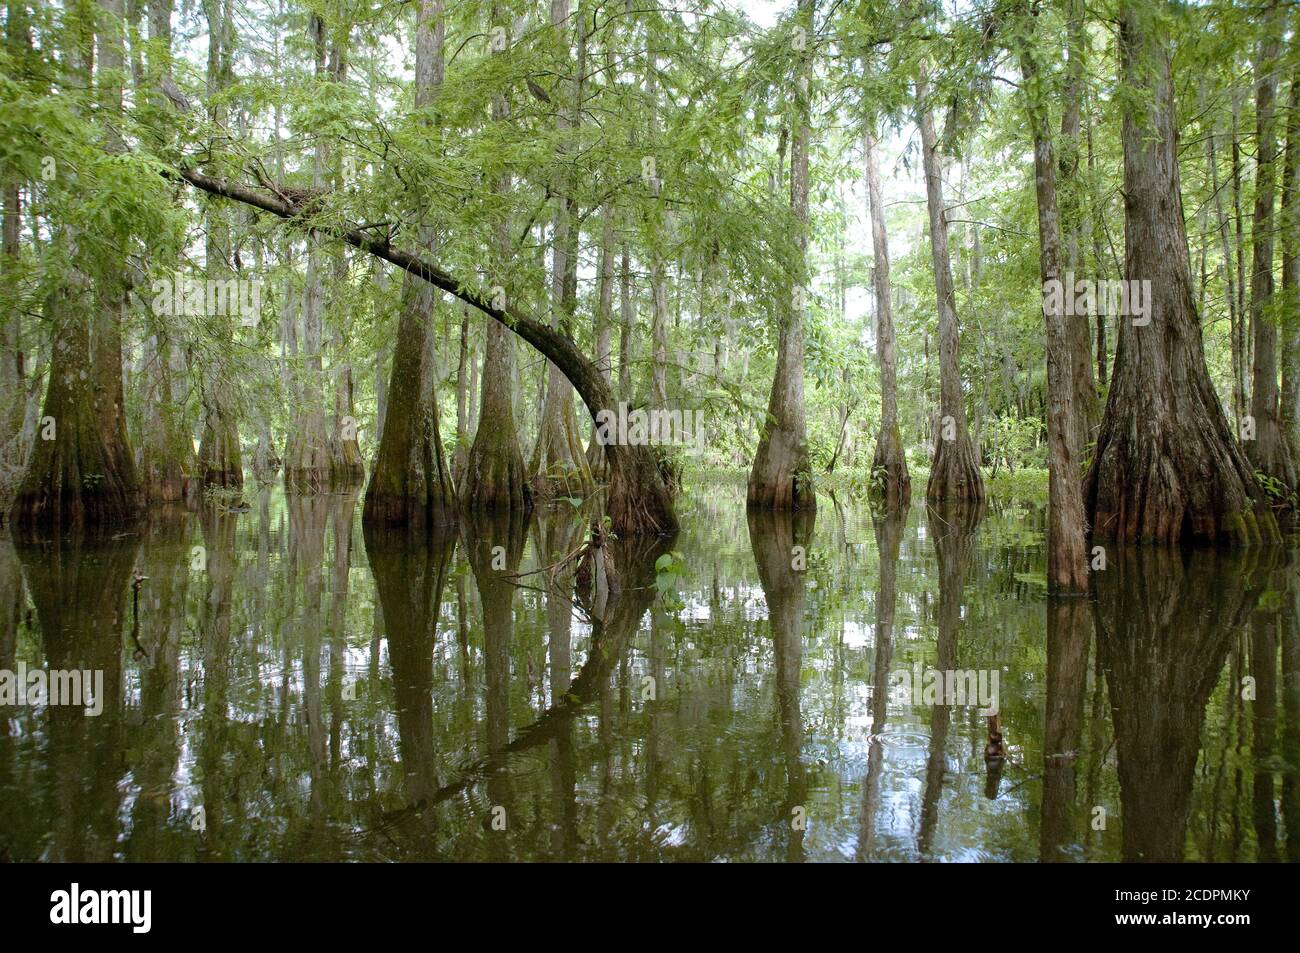 Trees and swampland in Lake Martin, part of the Cypress Island Preserve, on the western edge of the Atchafalaya swamp, near Lafayette Louisiana. Stock Photo